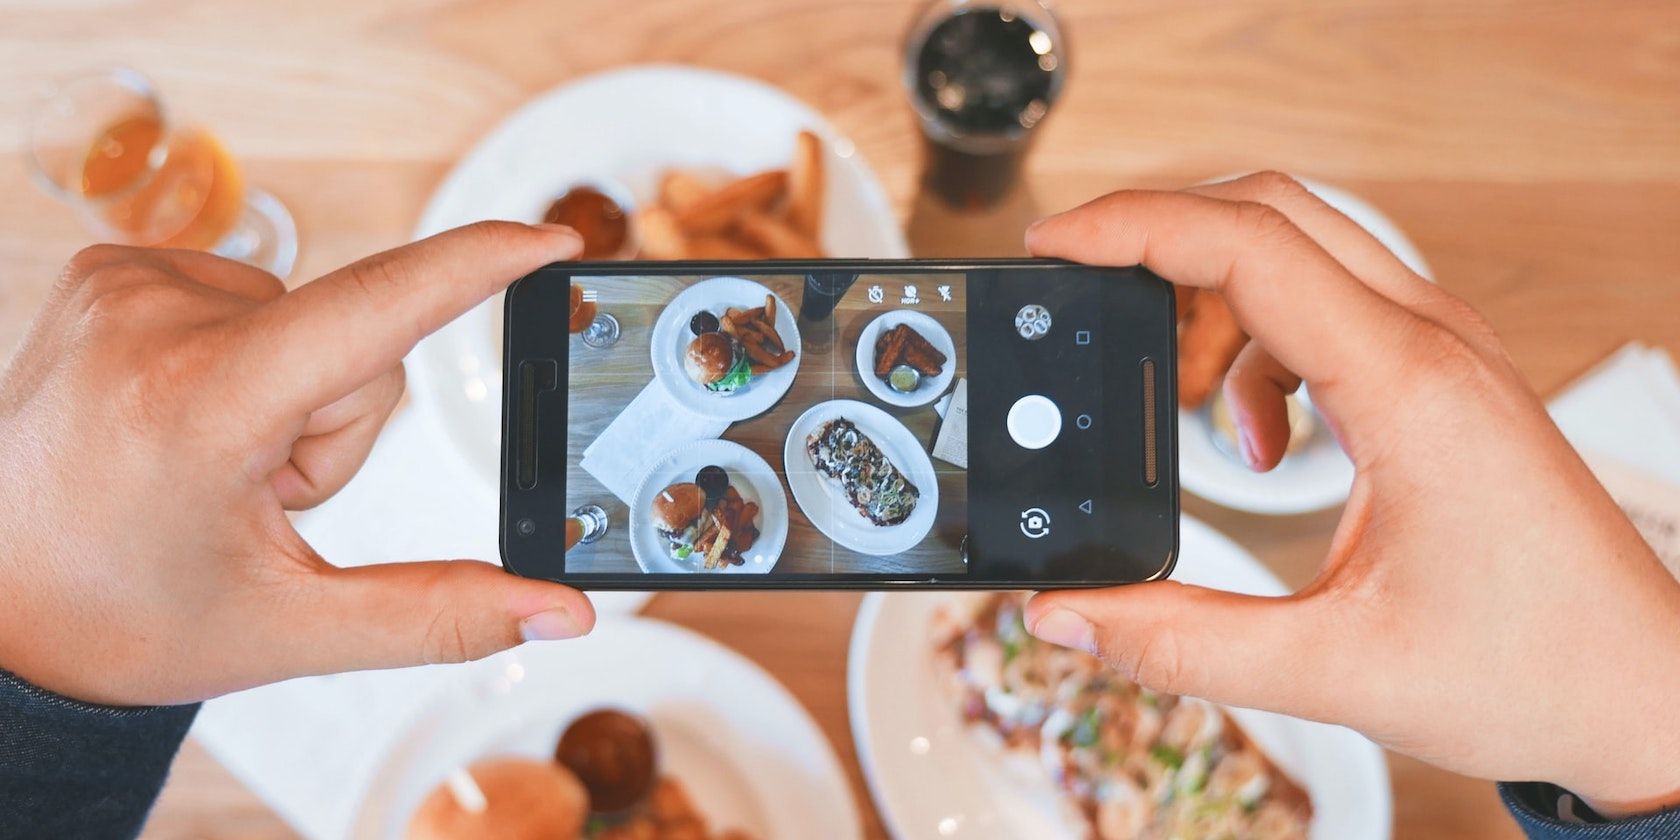 An overhead shot of two hands holding a smarphone taking a photo of several plates of food